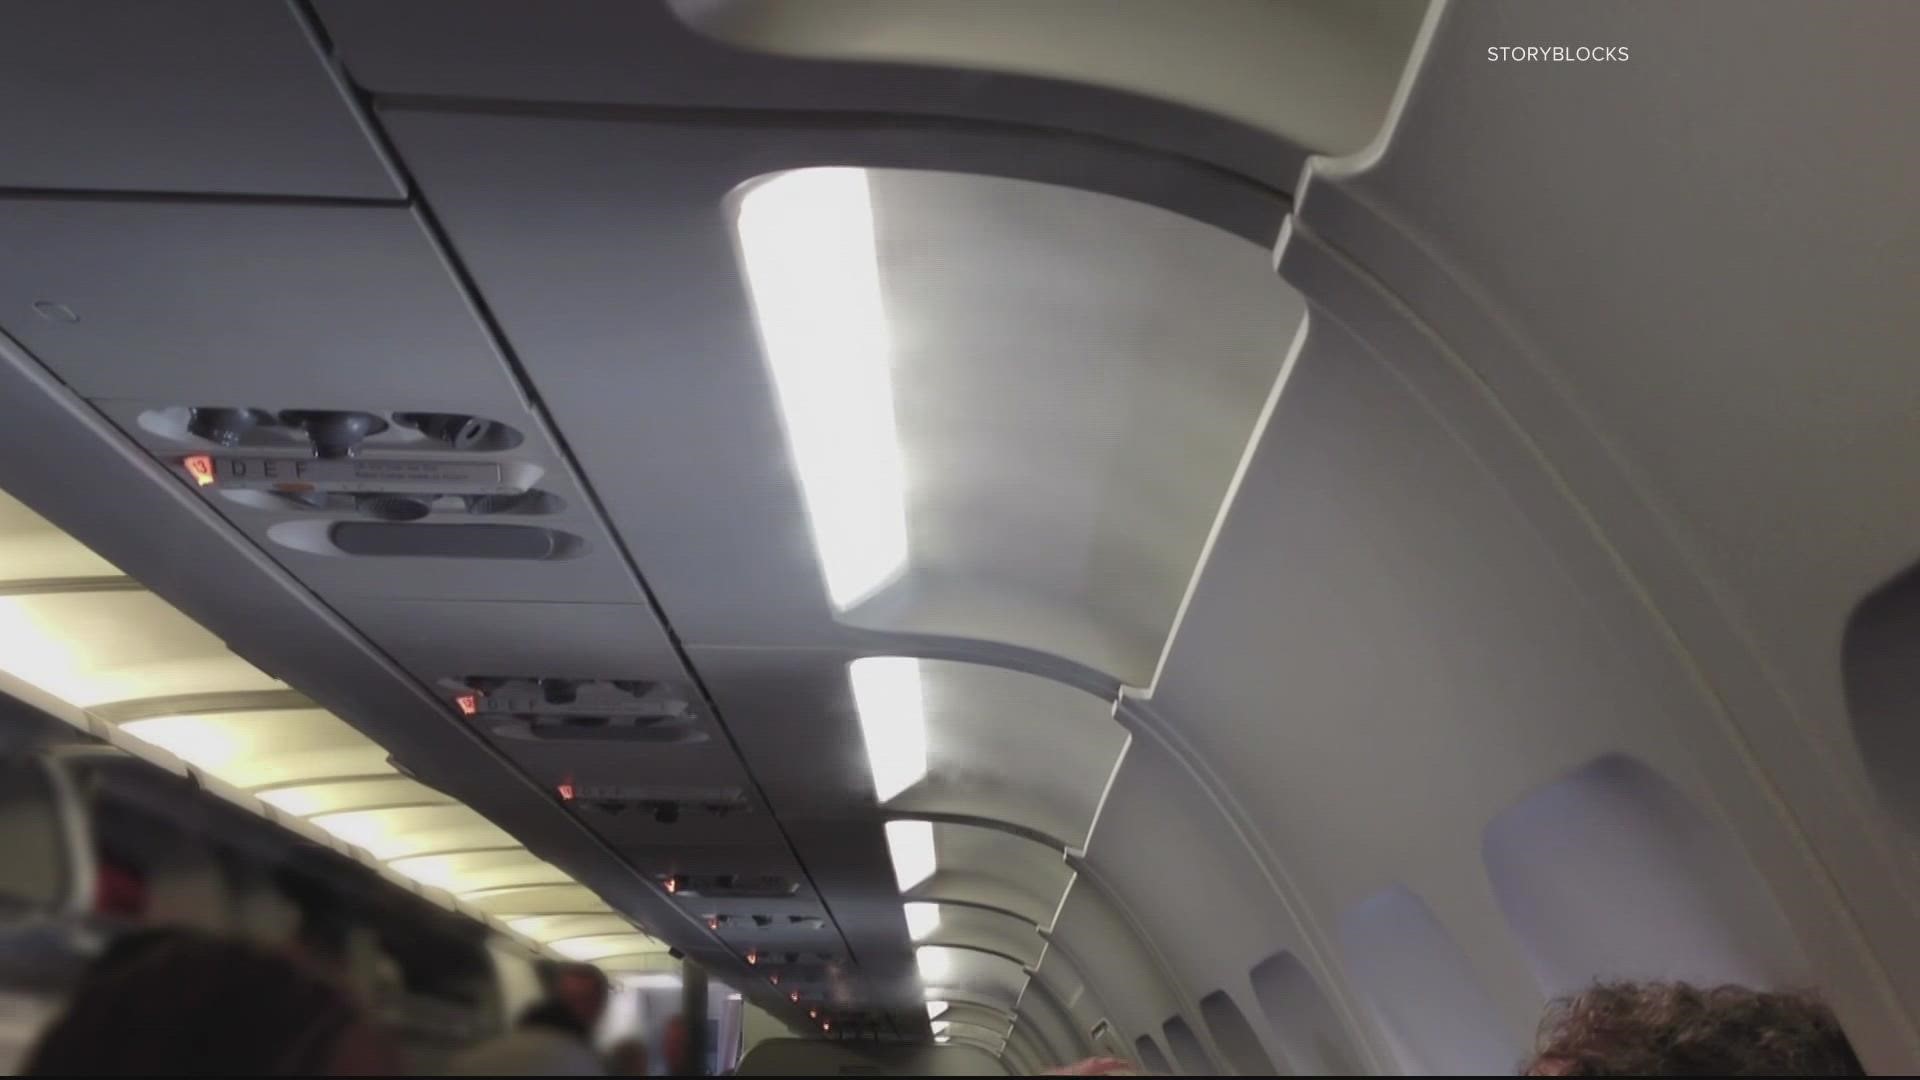 The FAA says airline carriers are not required to have air ventilation while passengers are boarding or disembarking.